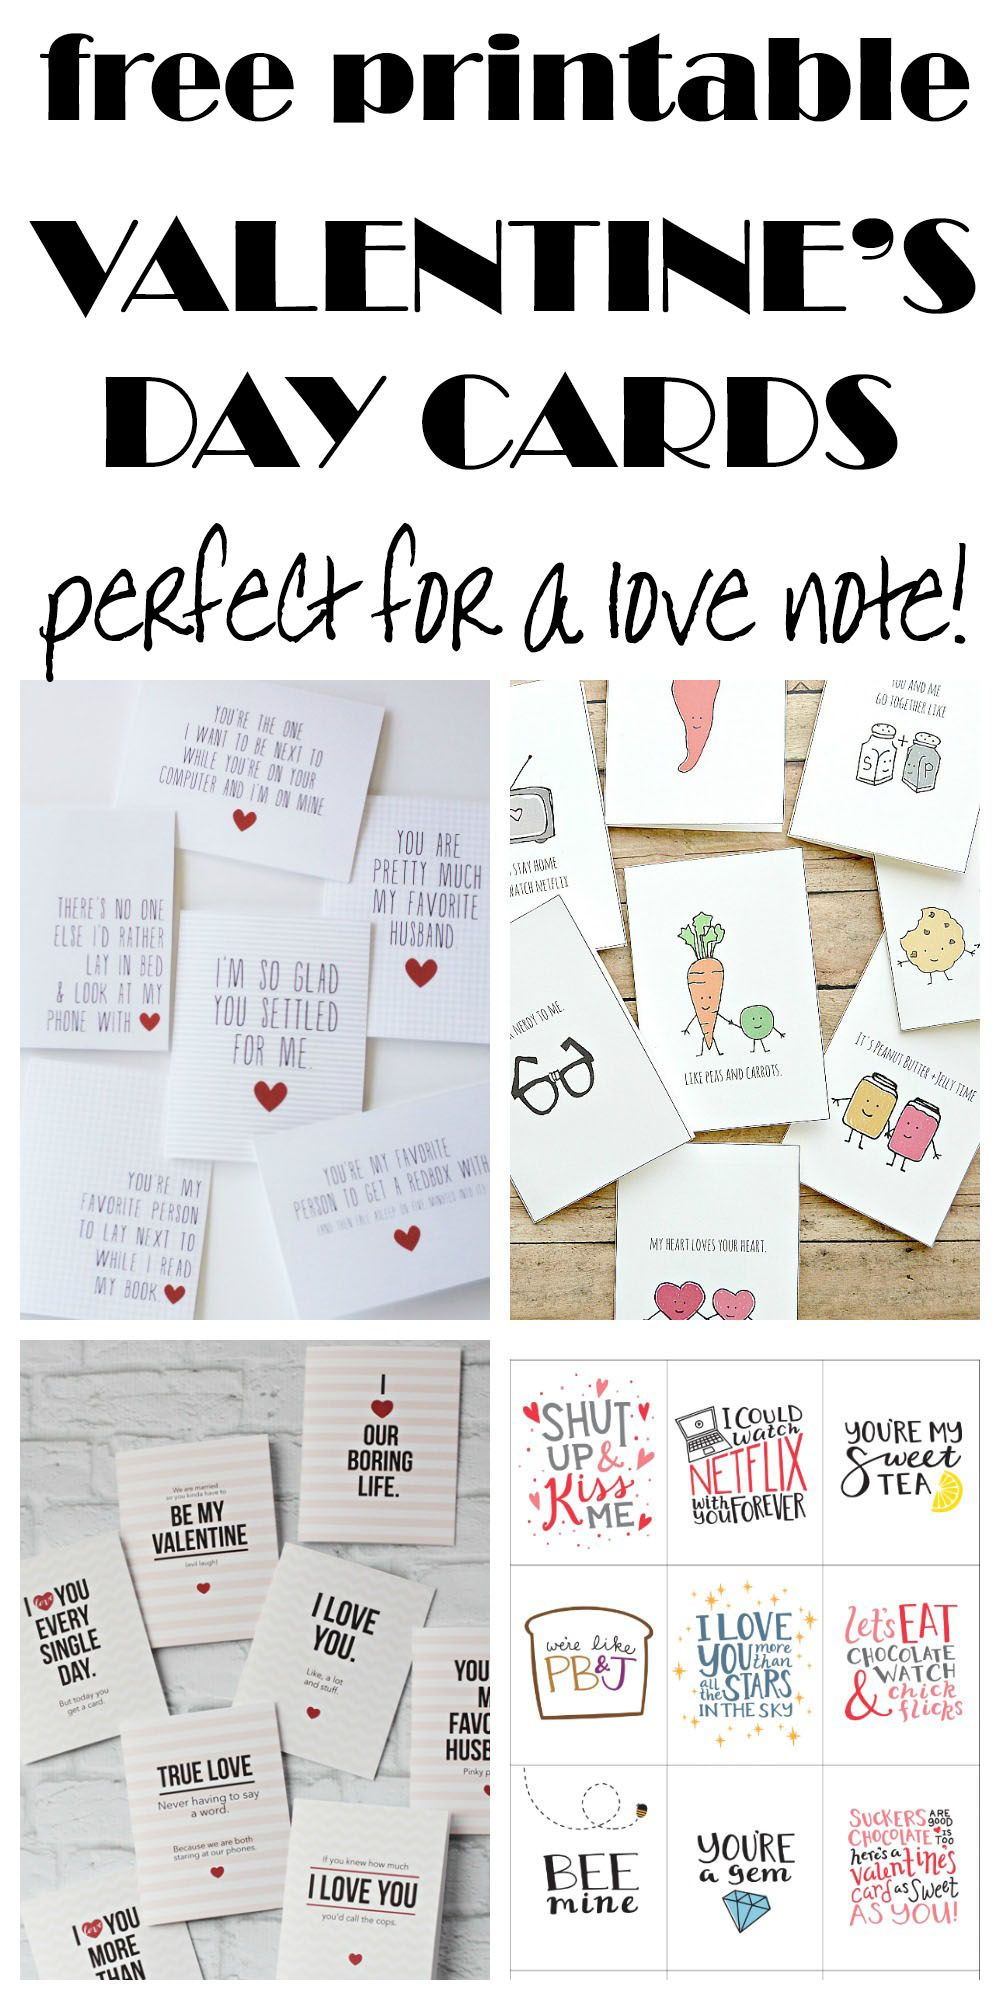 Funny And Cute, Free Printable Cards Perfect For A Love Note - Free Printable Love Cards